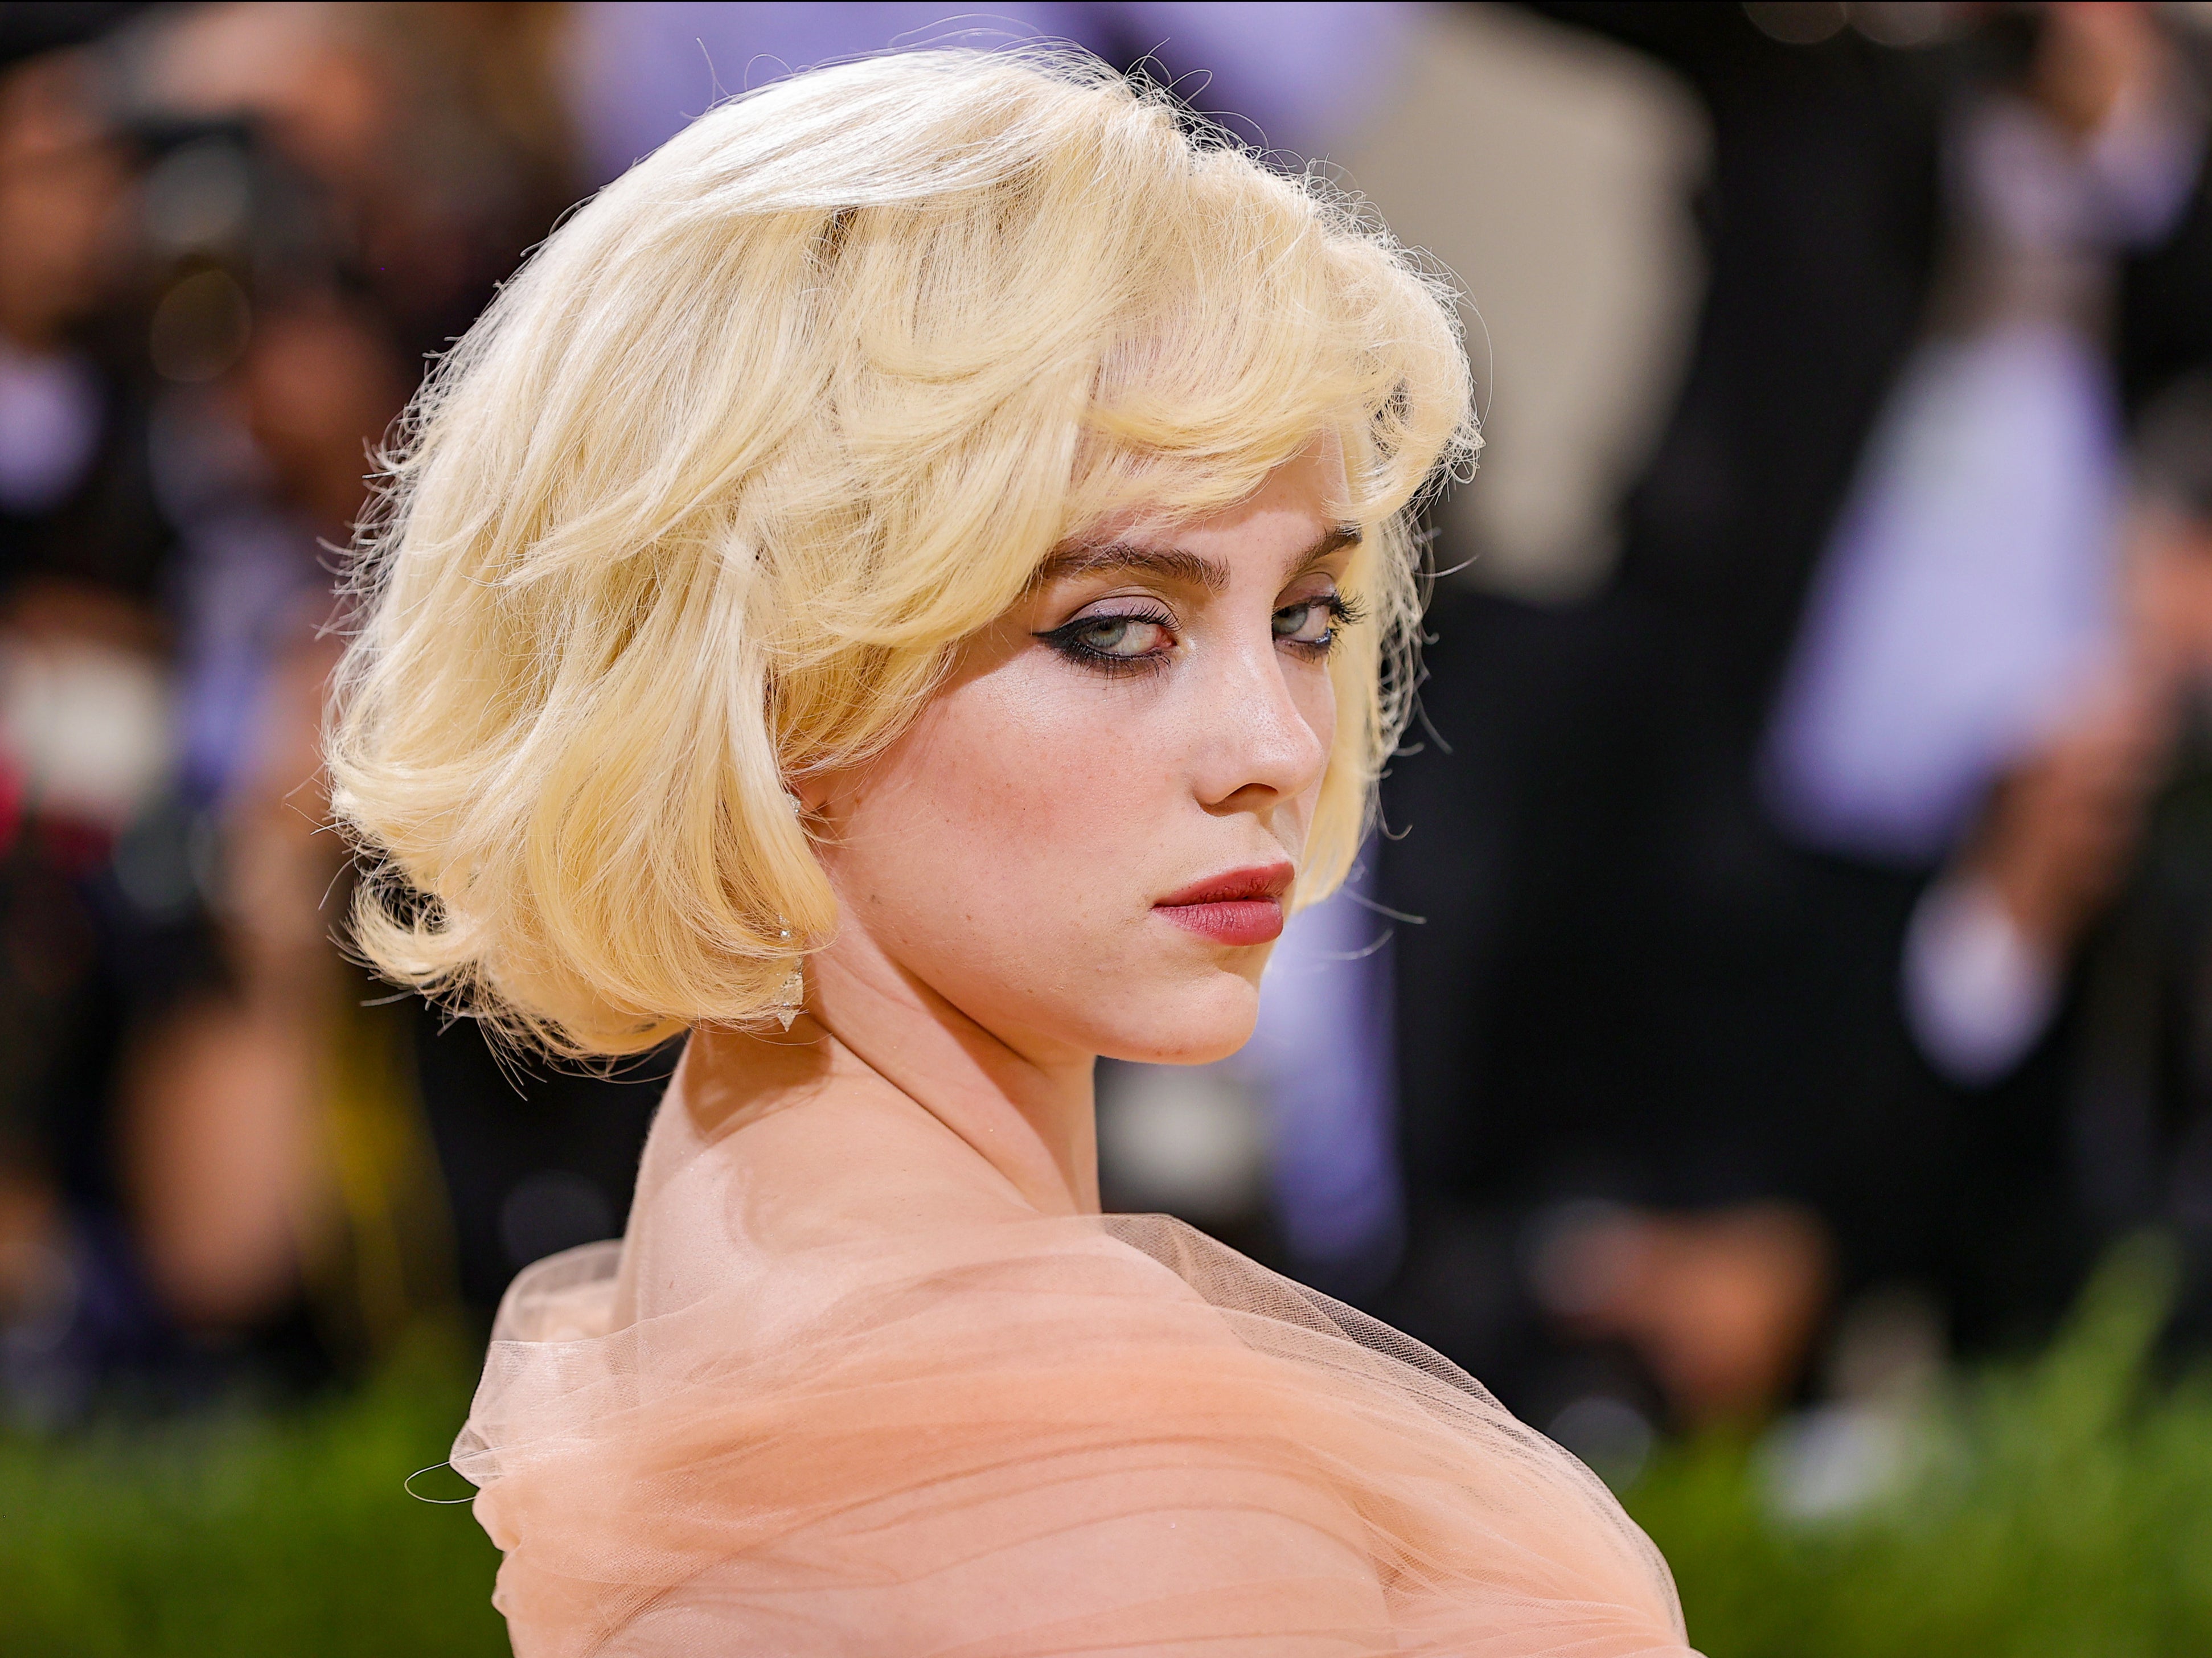 See the top 13 most outlandish looks at the 2021 Met Gala